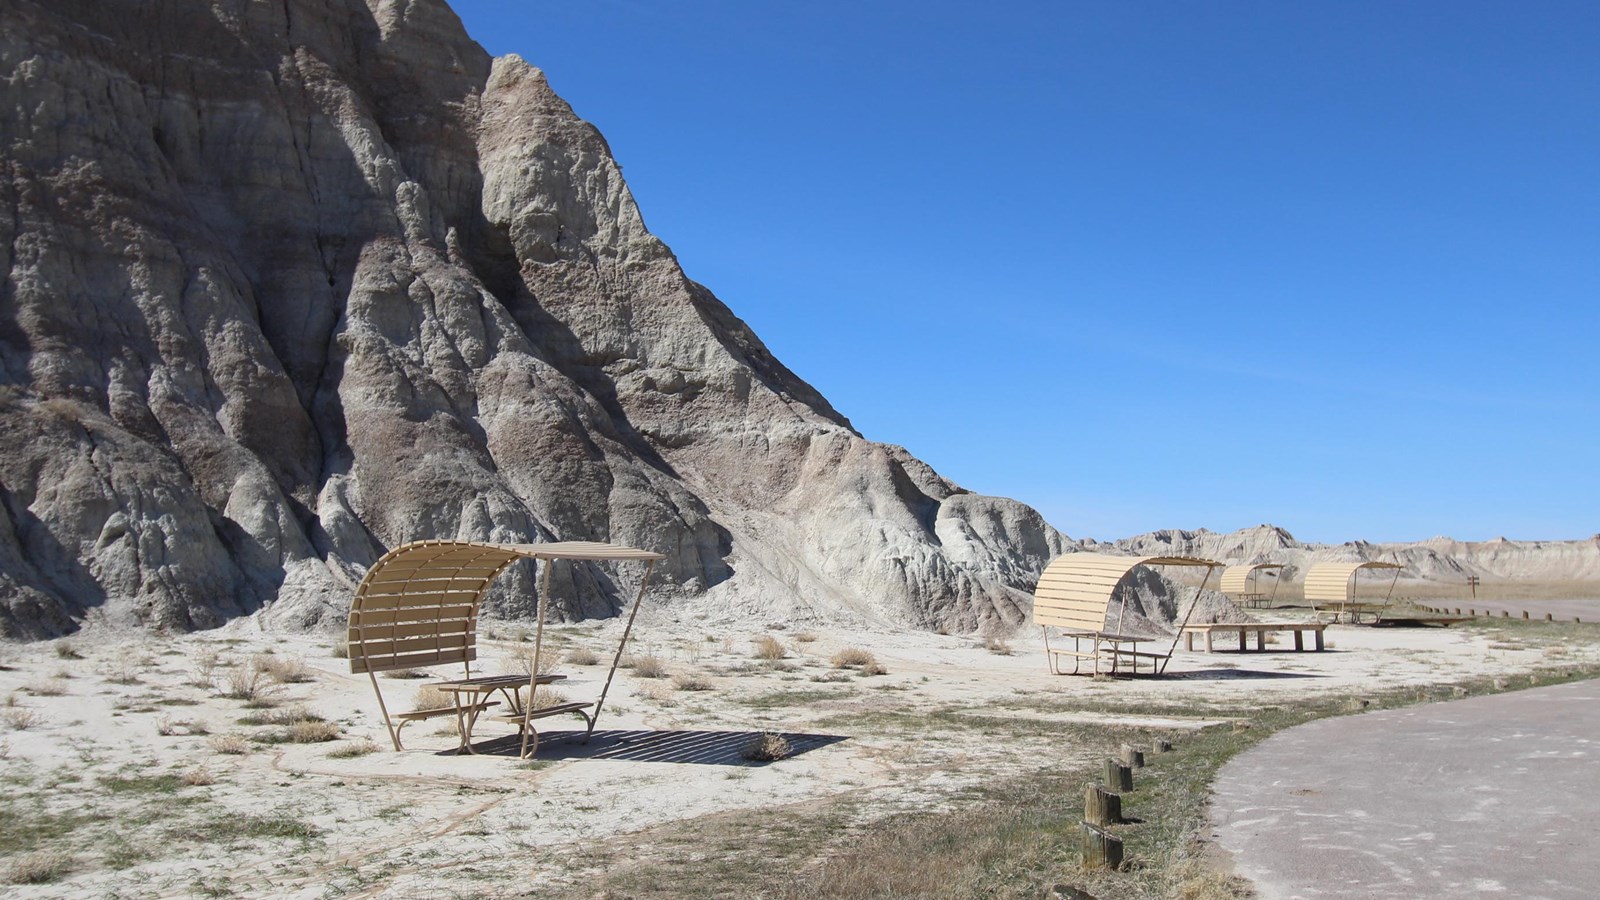 Two shaded picnic tables beside paved road, badlands butte, and under a blue sky.